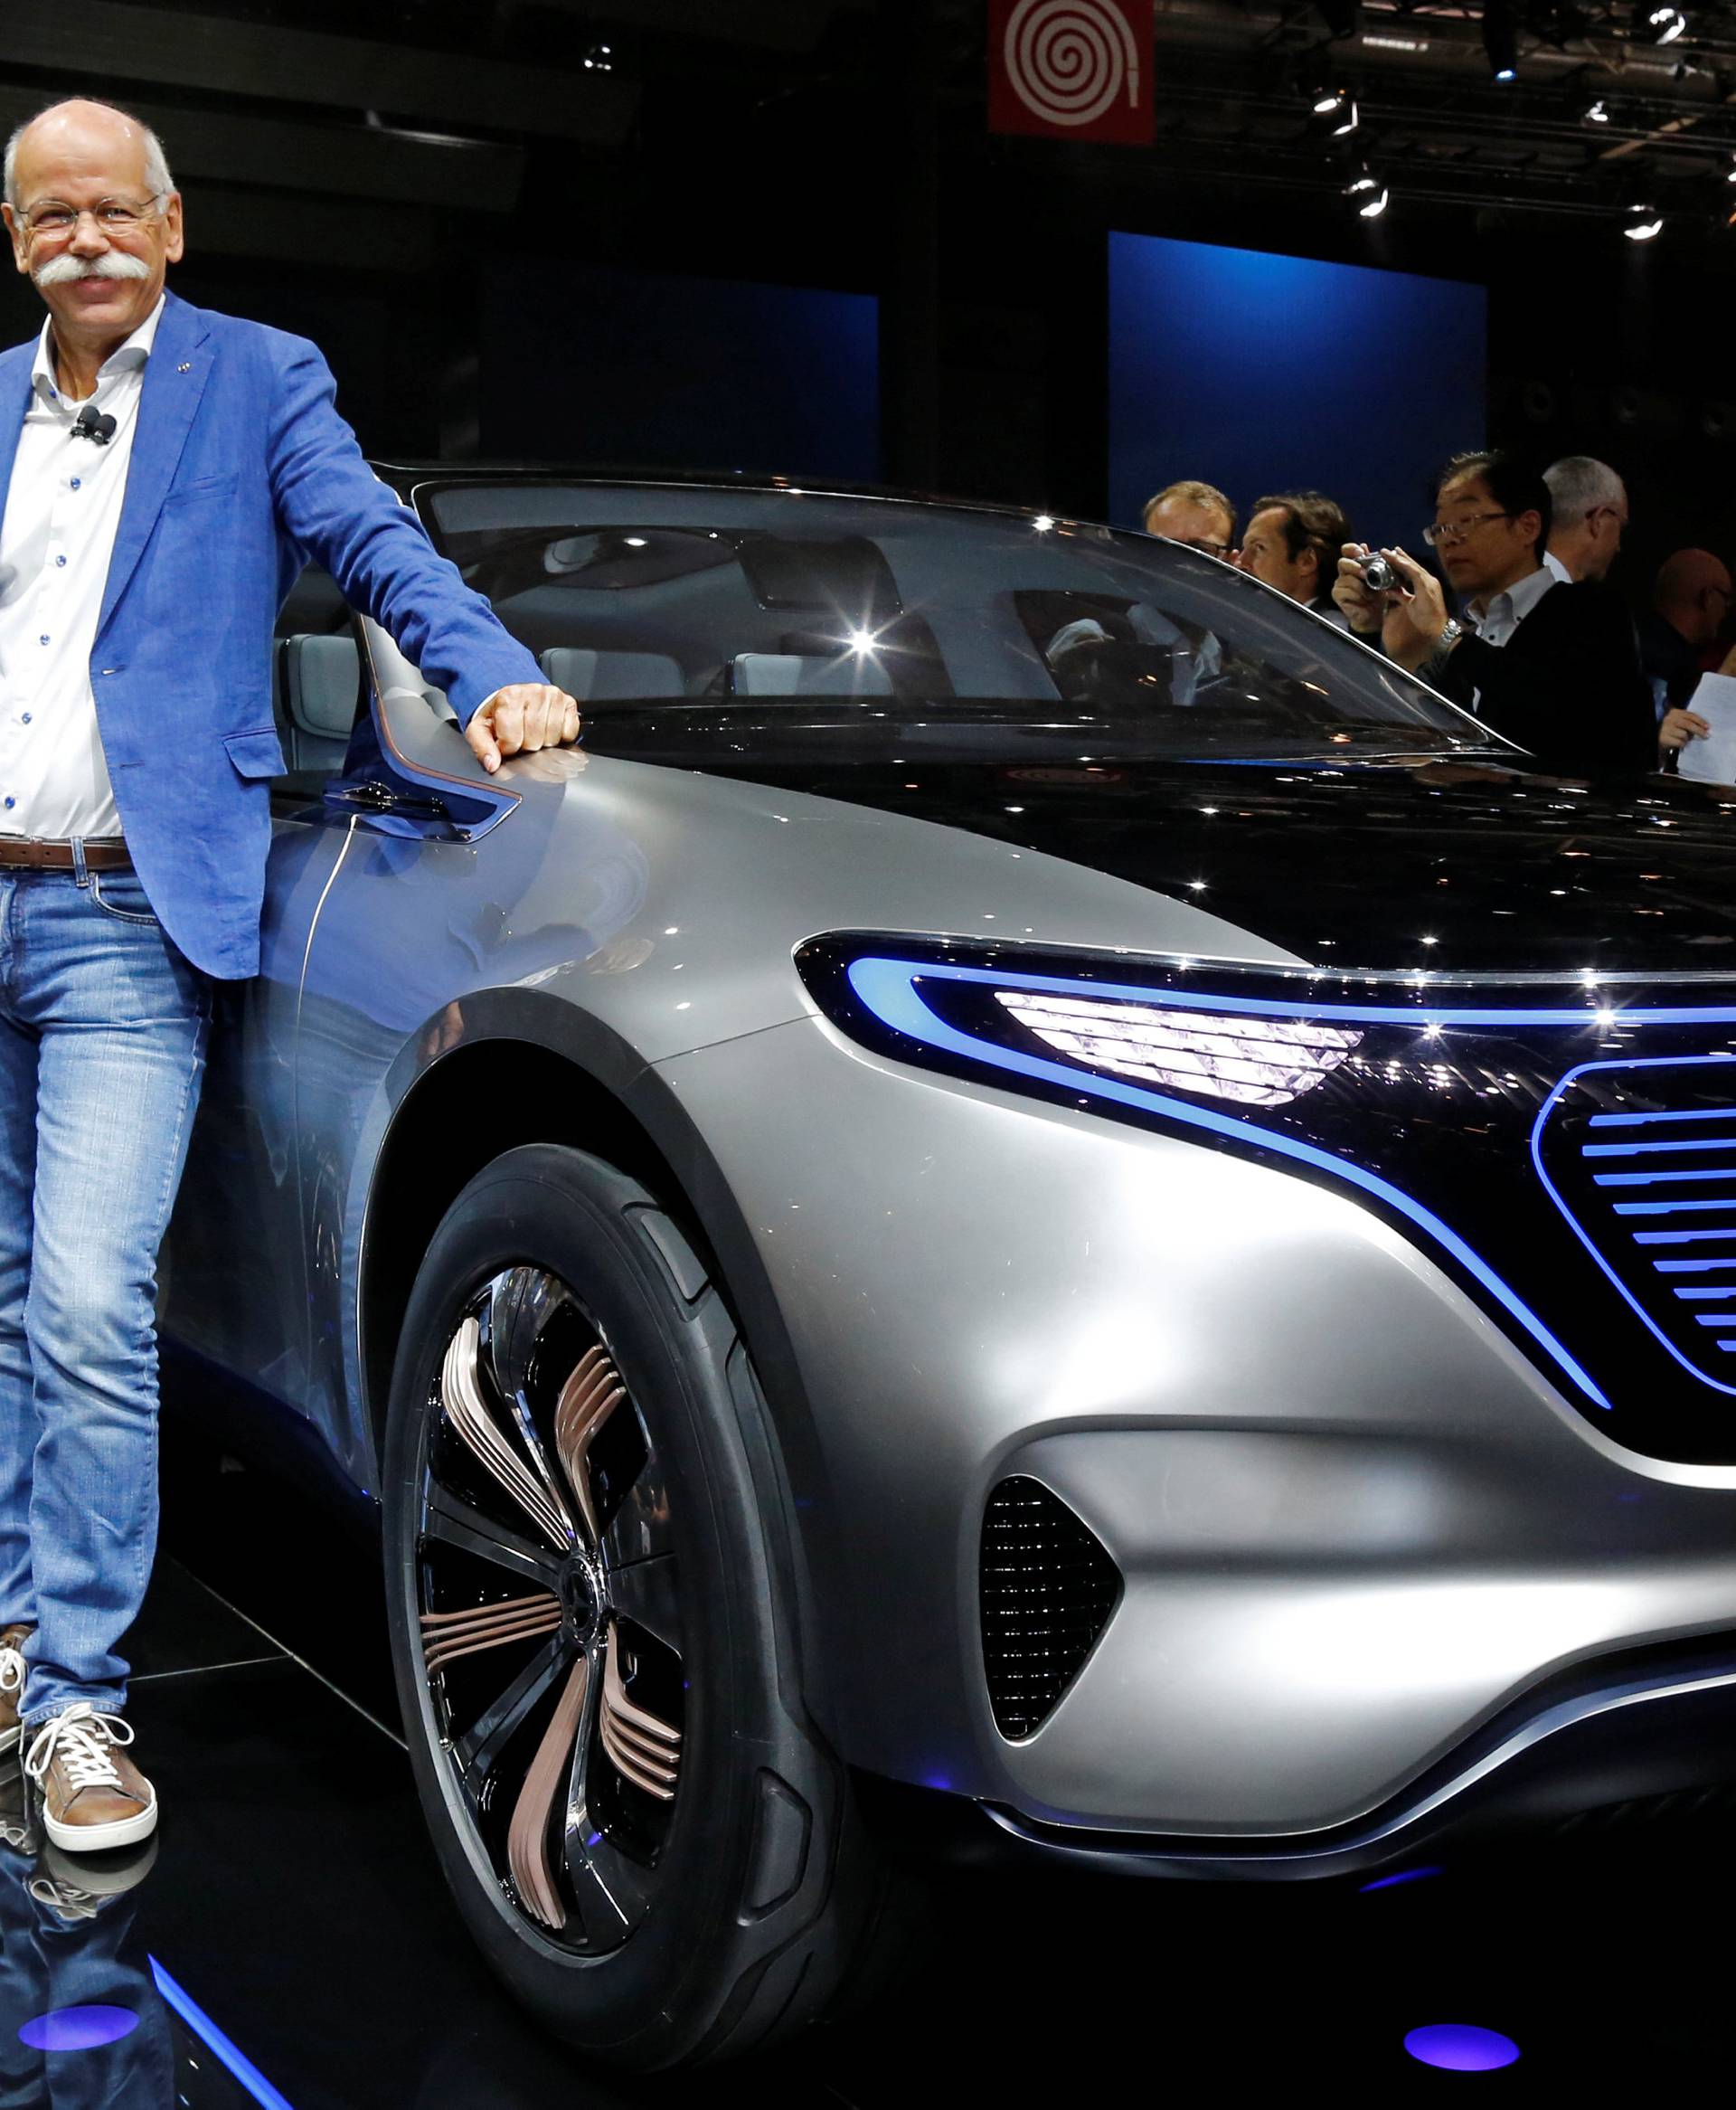 Dieter Zetsche, CEO of Daimler and Head of Mercedes-Benz, poses in front of a Mercedes EQ Electric car on media day at the Mondial de l'Automobile in Paris